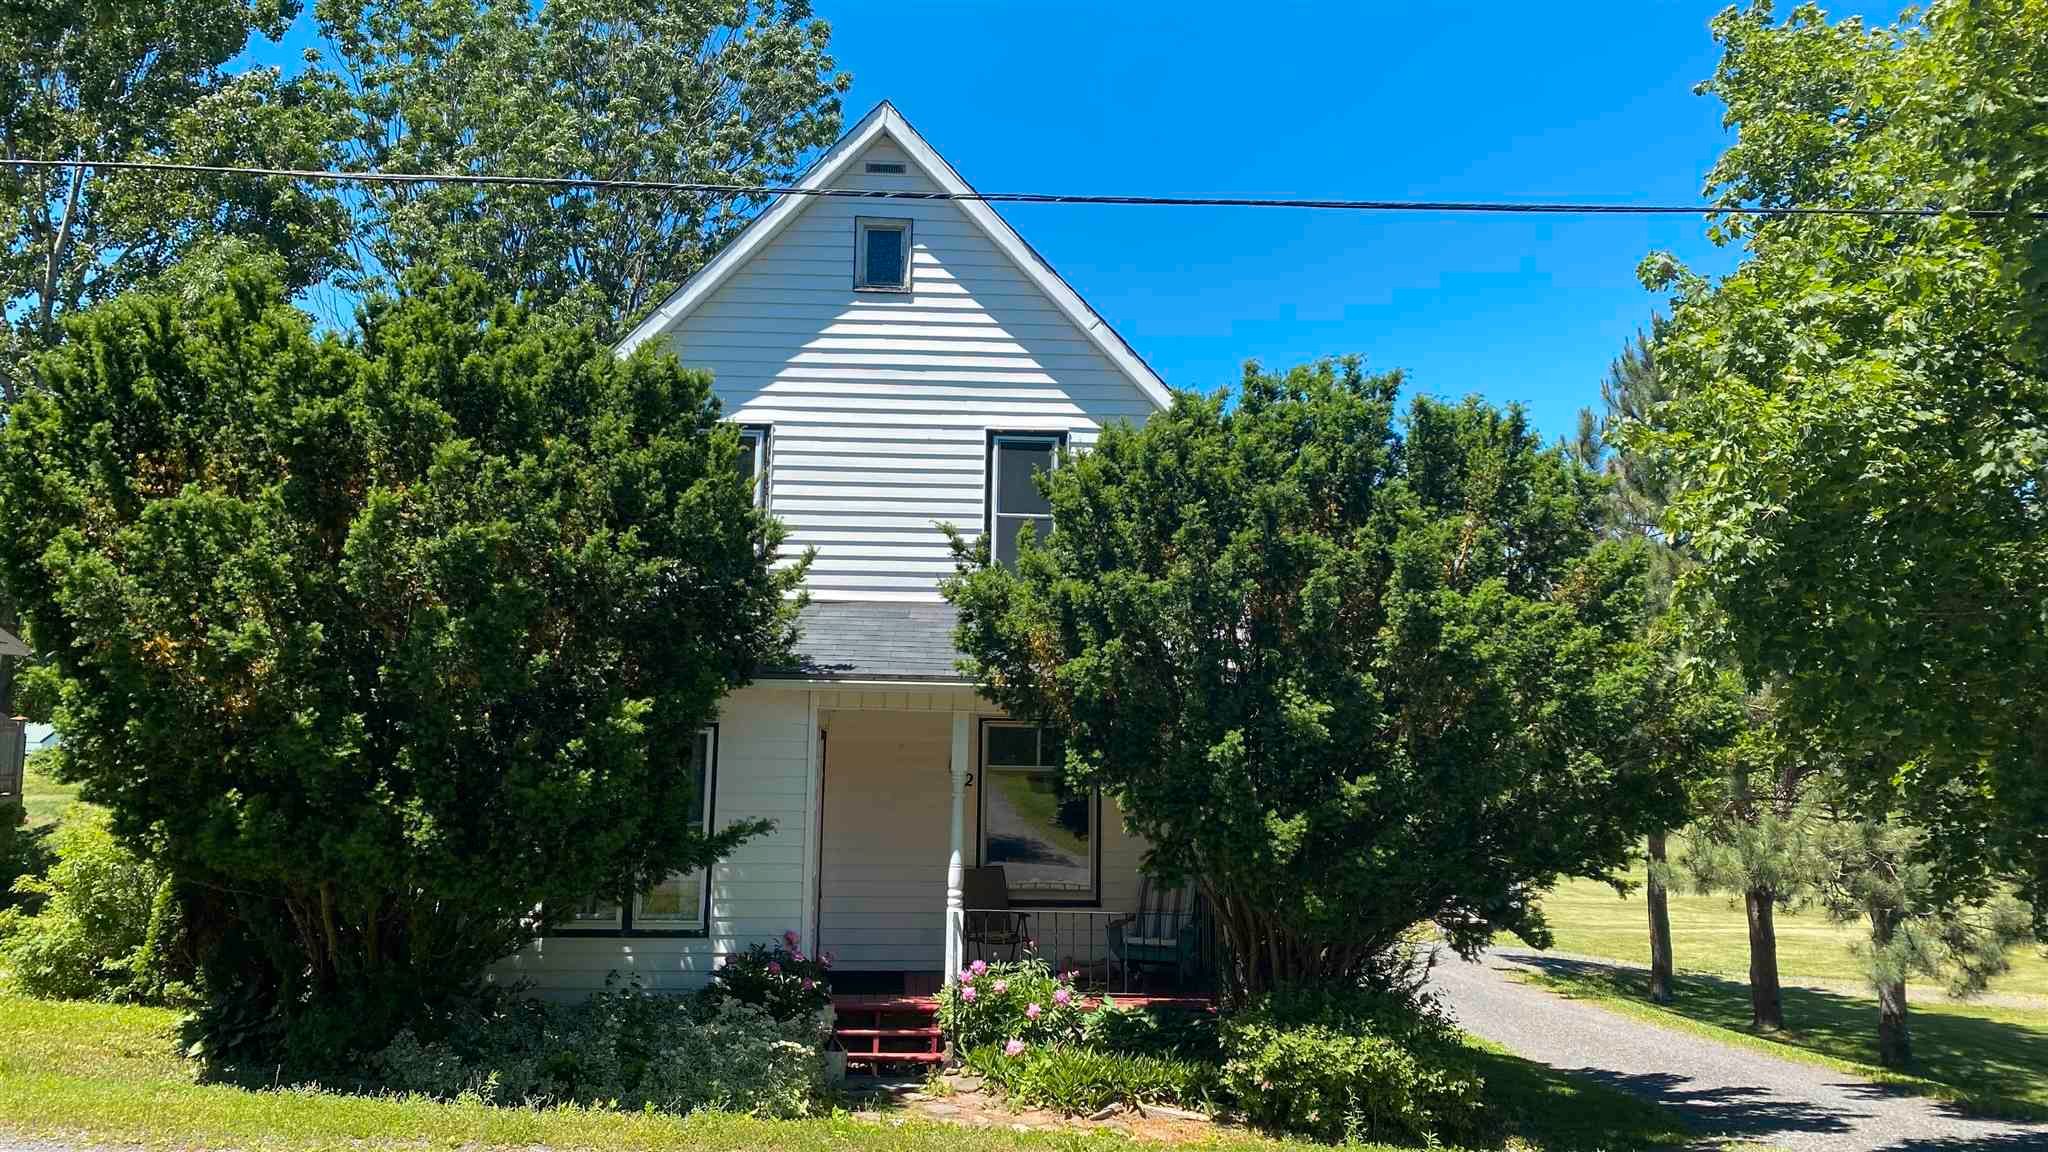 Main Photo: 32 Edward Street in Plymouth: 108-Rural Pictou County Residential for sale (Northern Region)  : MLS®# 202116726